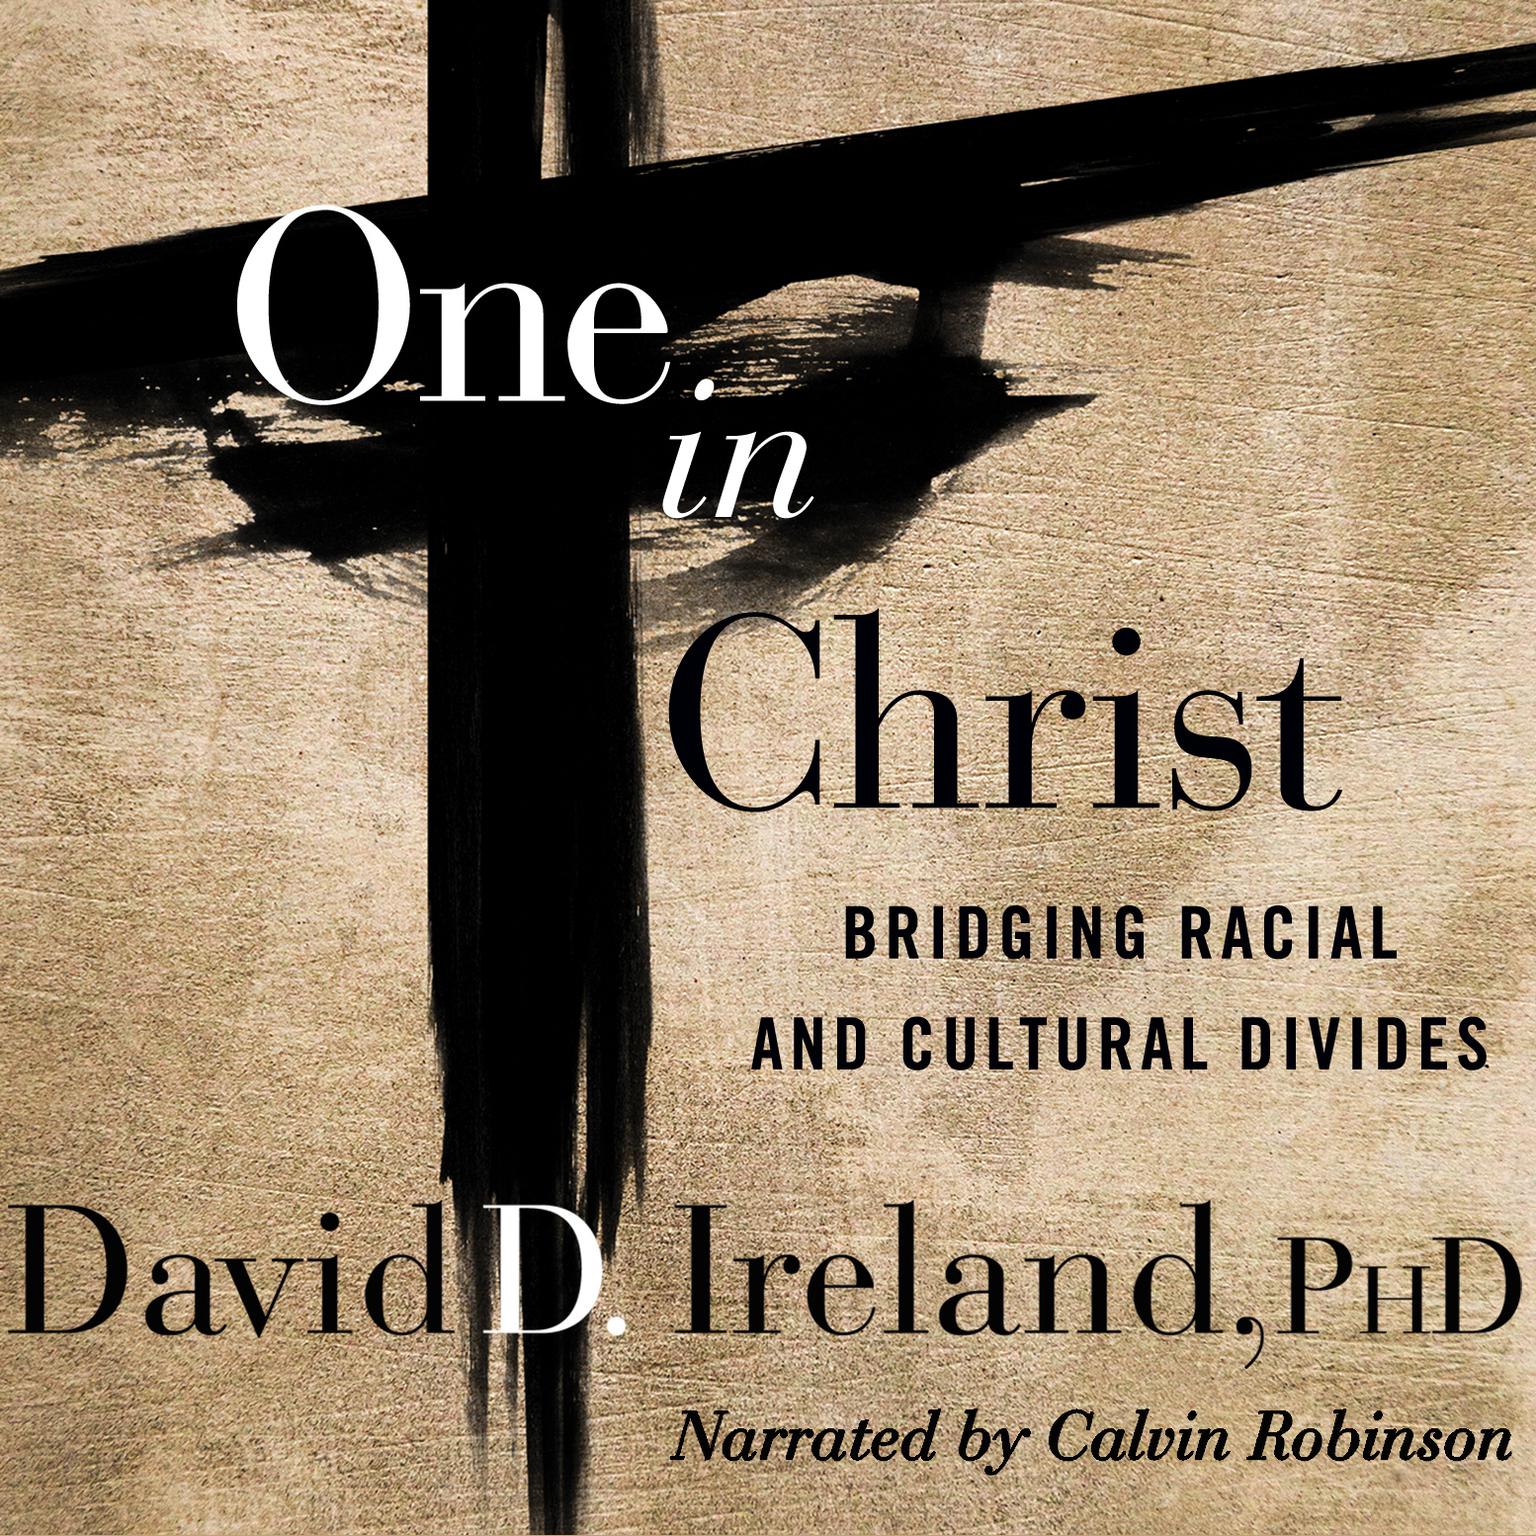 One in Christ: Bridging Racial & Cultural Divides Audiobook, by David D. Ireland